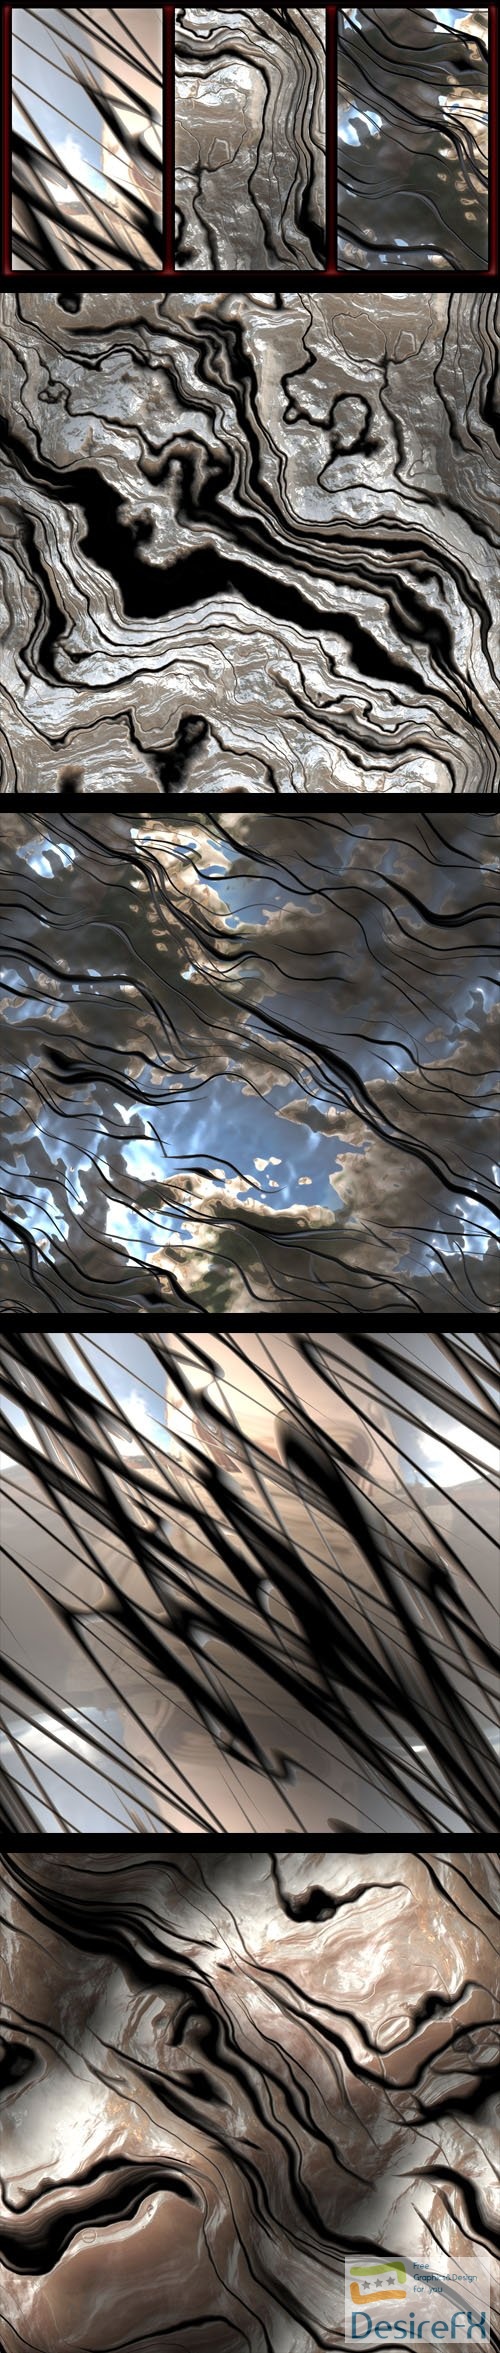 Seamless Reflective Abstract Malleable Metal - Photoshop Patterns + Textures